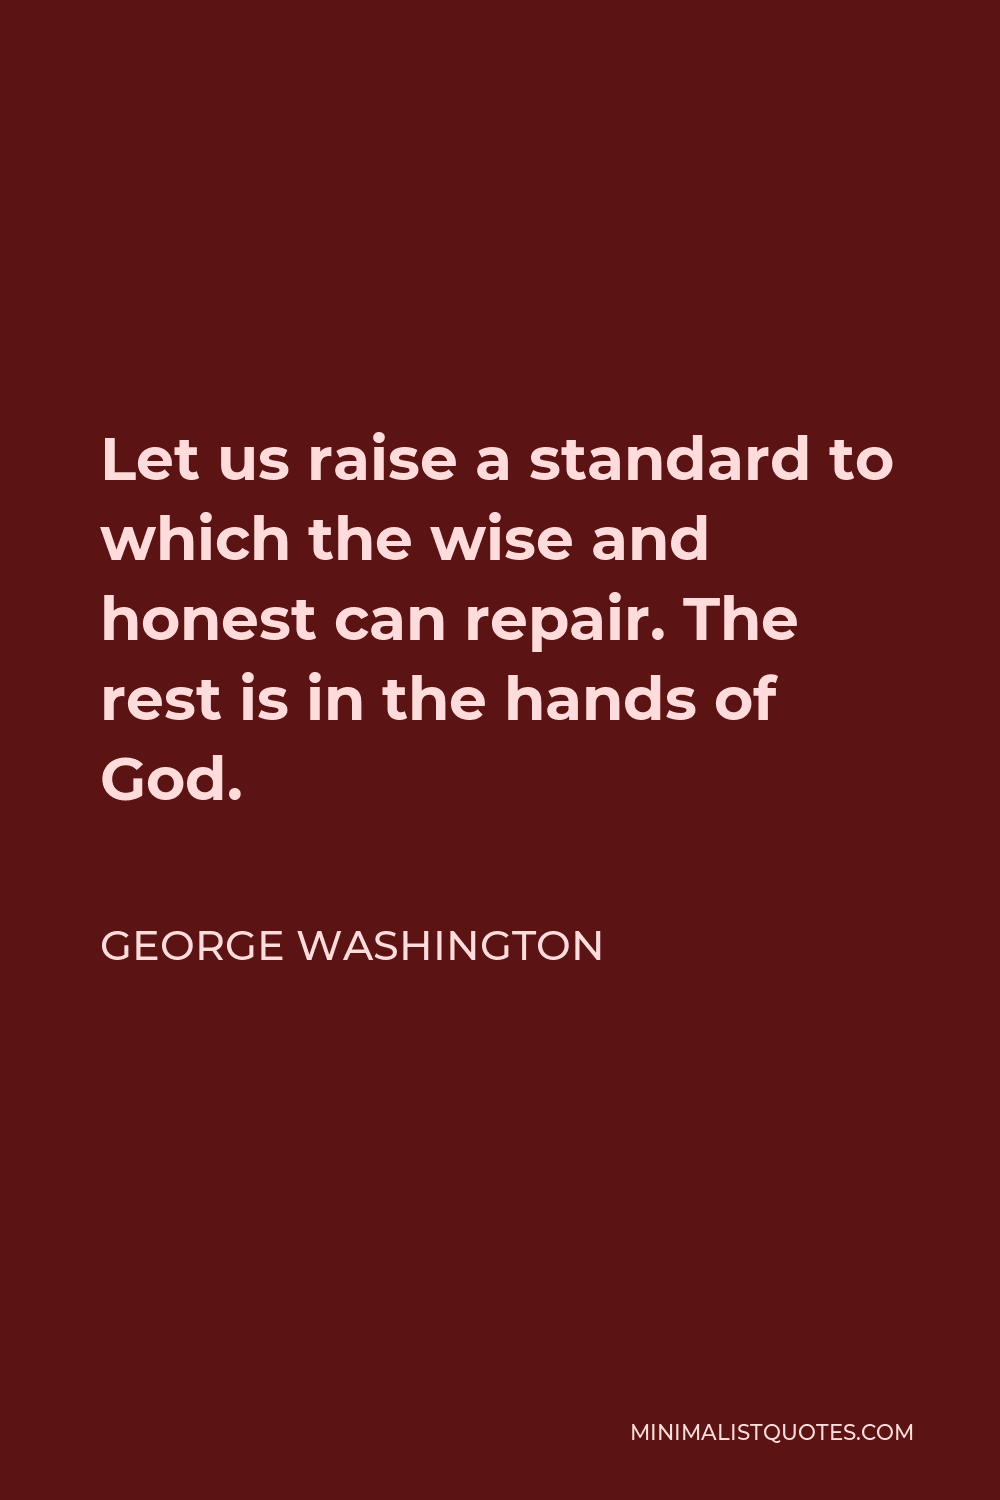 George Washington Quote - Let us raise a standard to which the wise and honest can repair. The rest is in the hands of God.